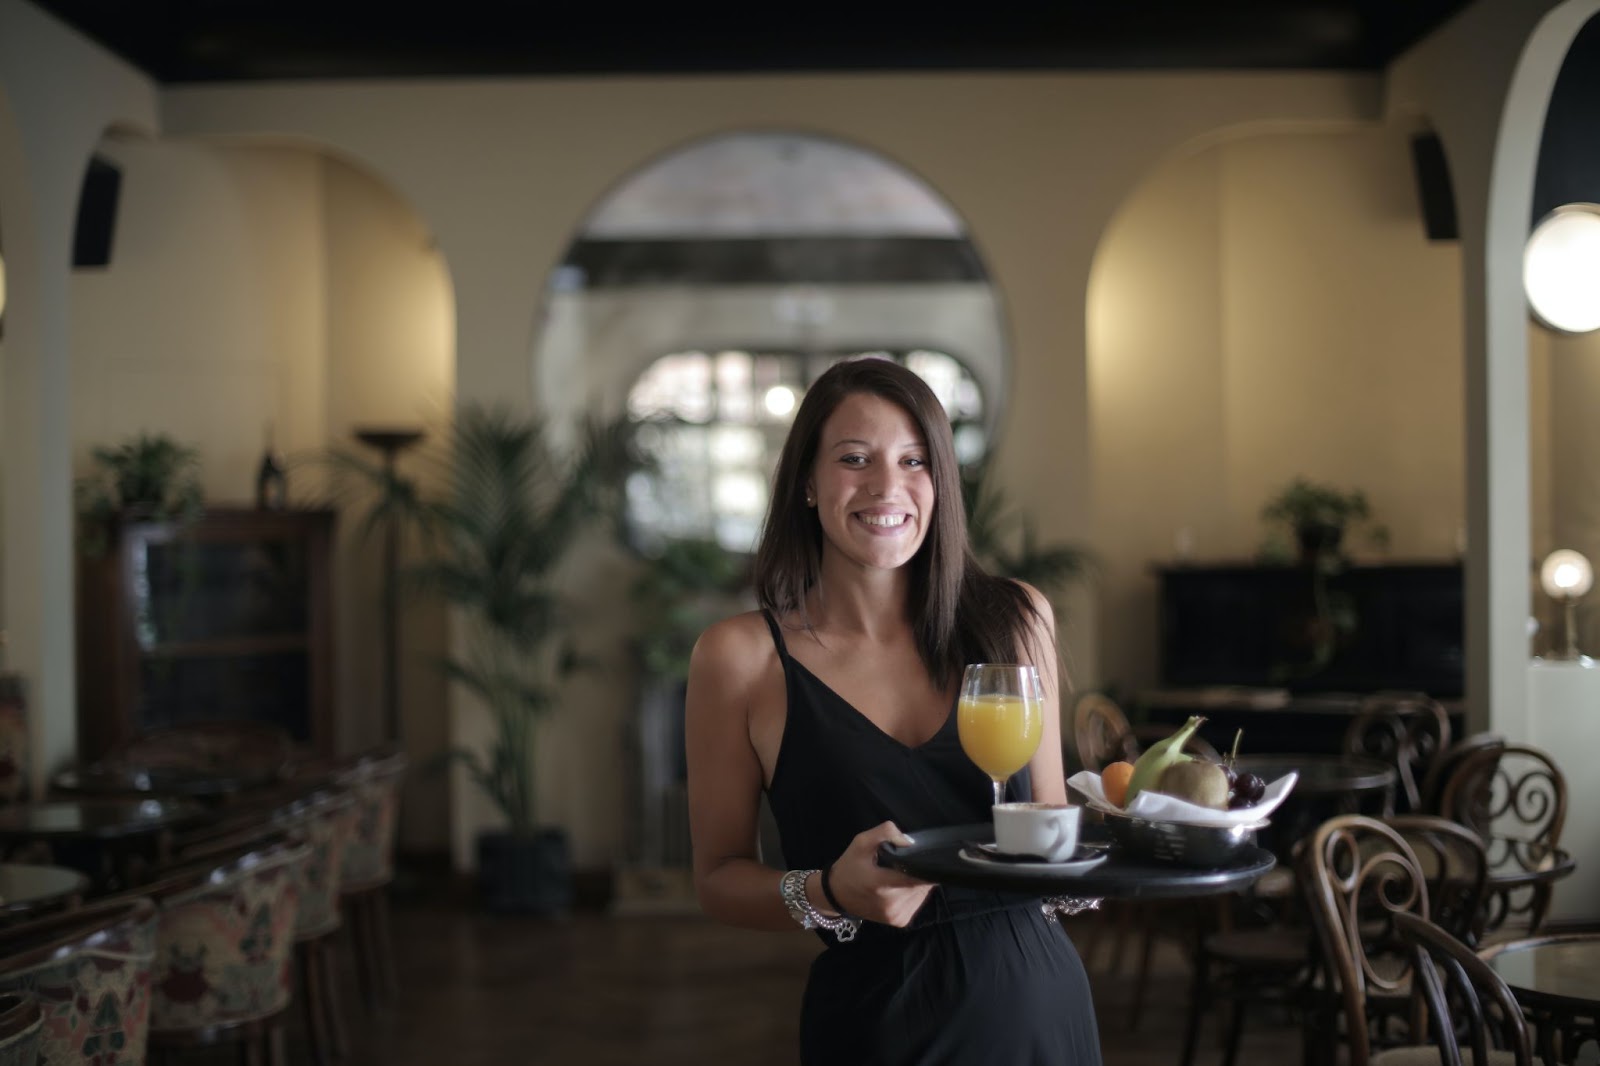 Restaurant manager pauses with a tray of fresh fruit, coffee and juice, wearing a grateful, welcoming smile.